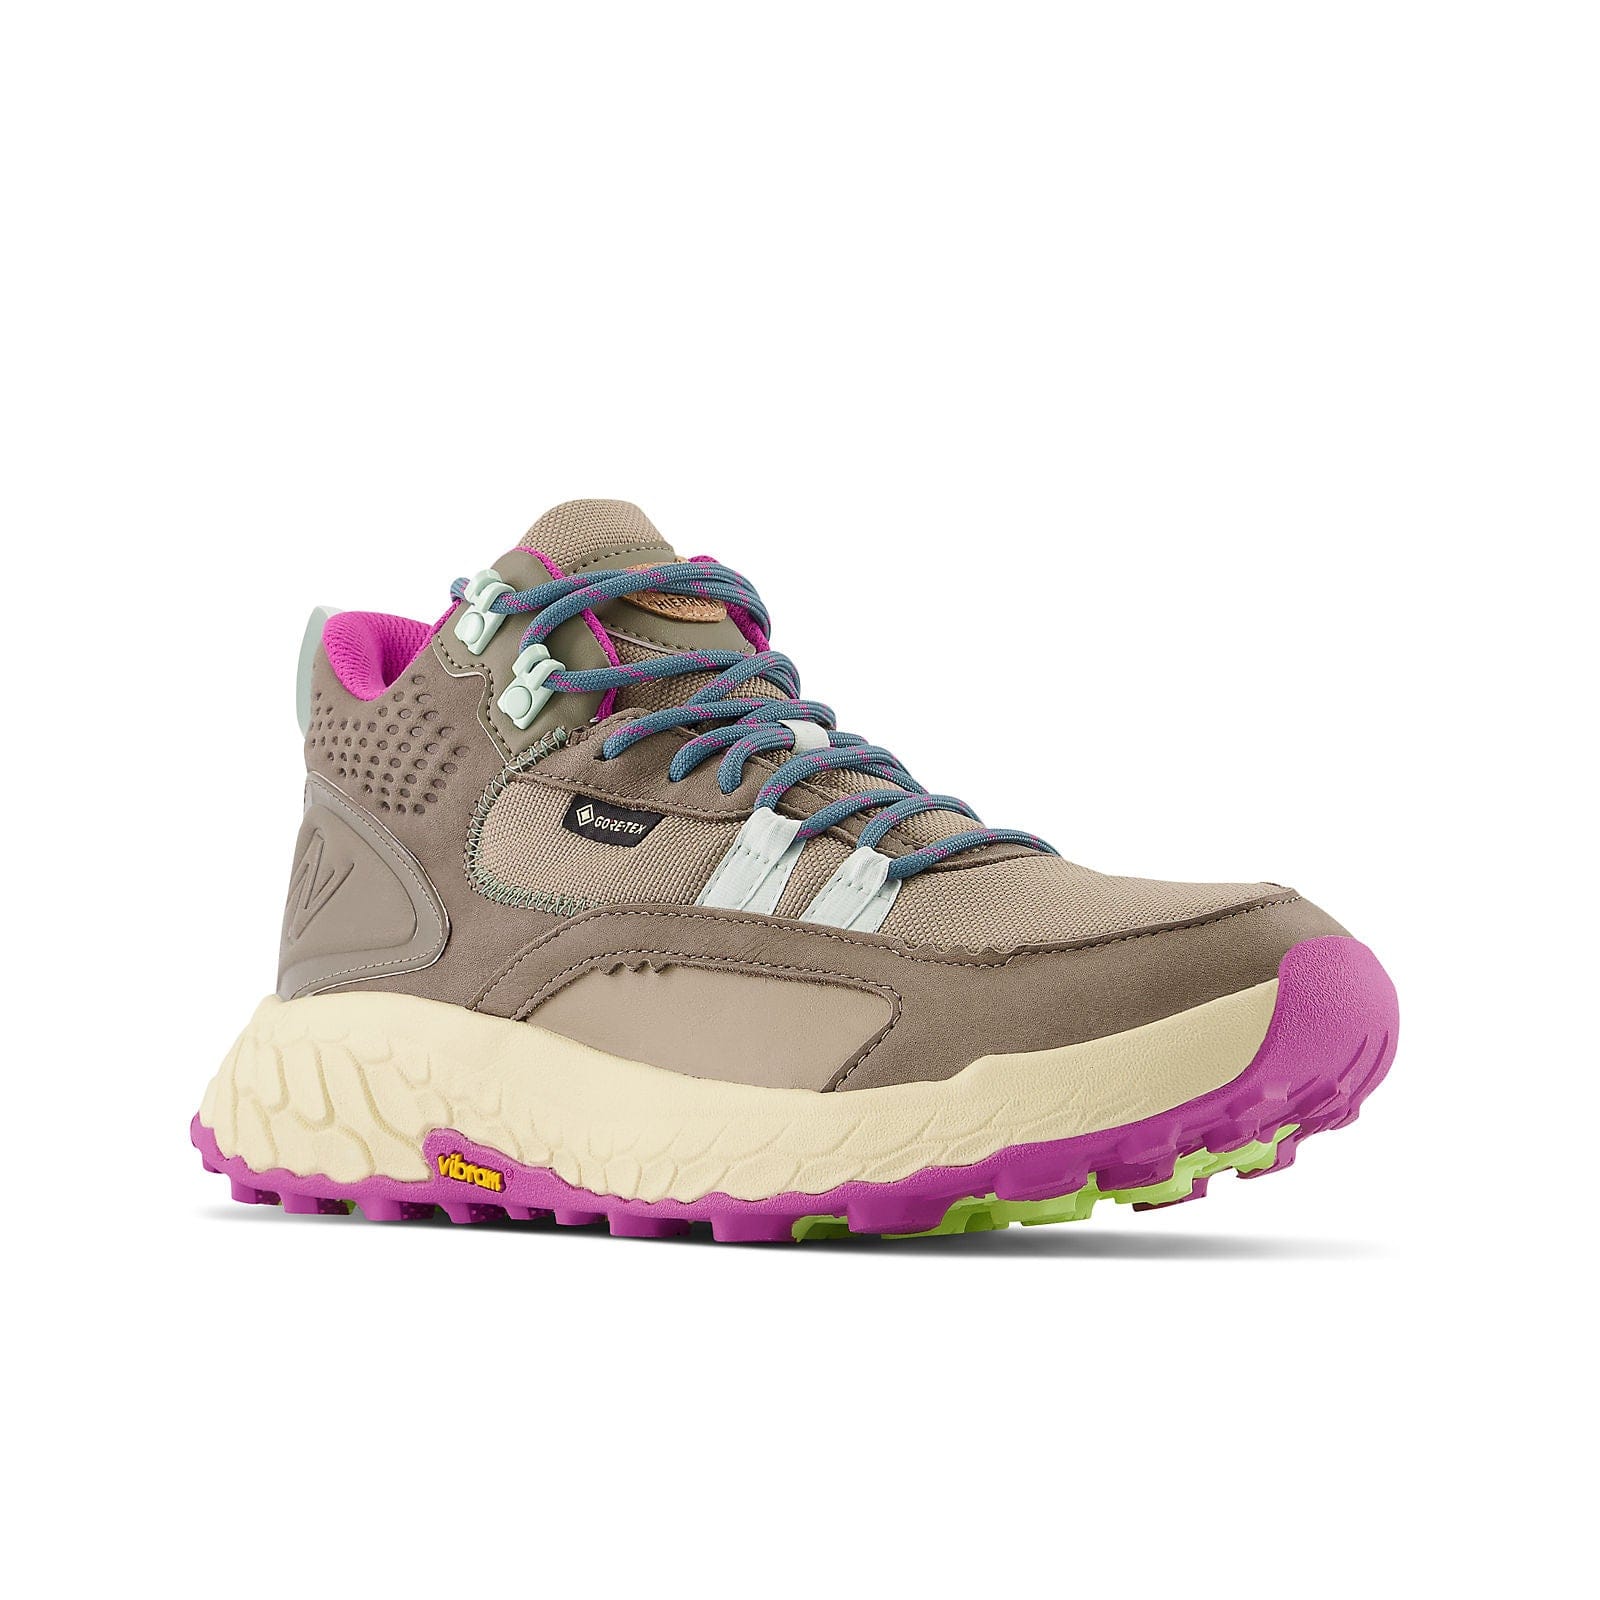 New Balance Fresh FoamX Hierro Mid GTX (Womens) - Bungee with Brindle and Cosmic Jade